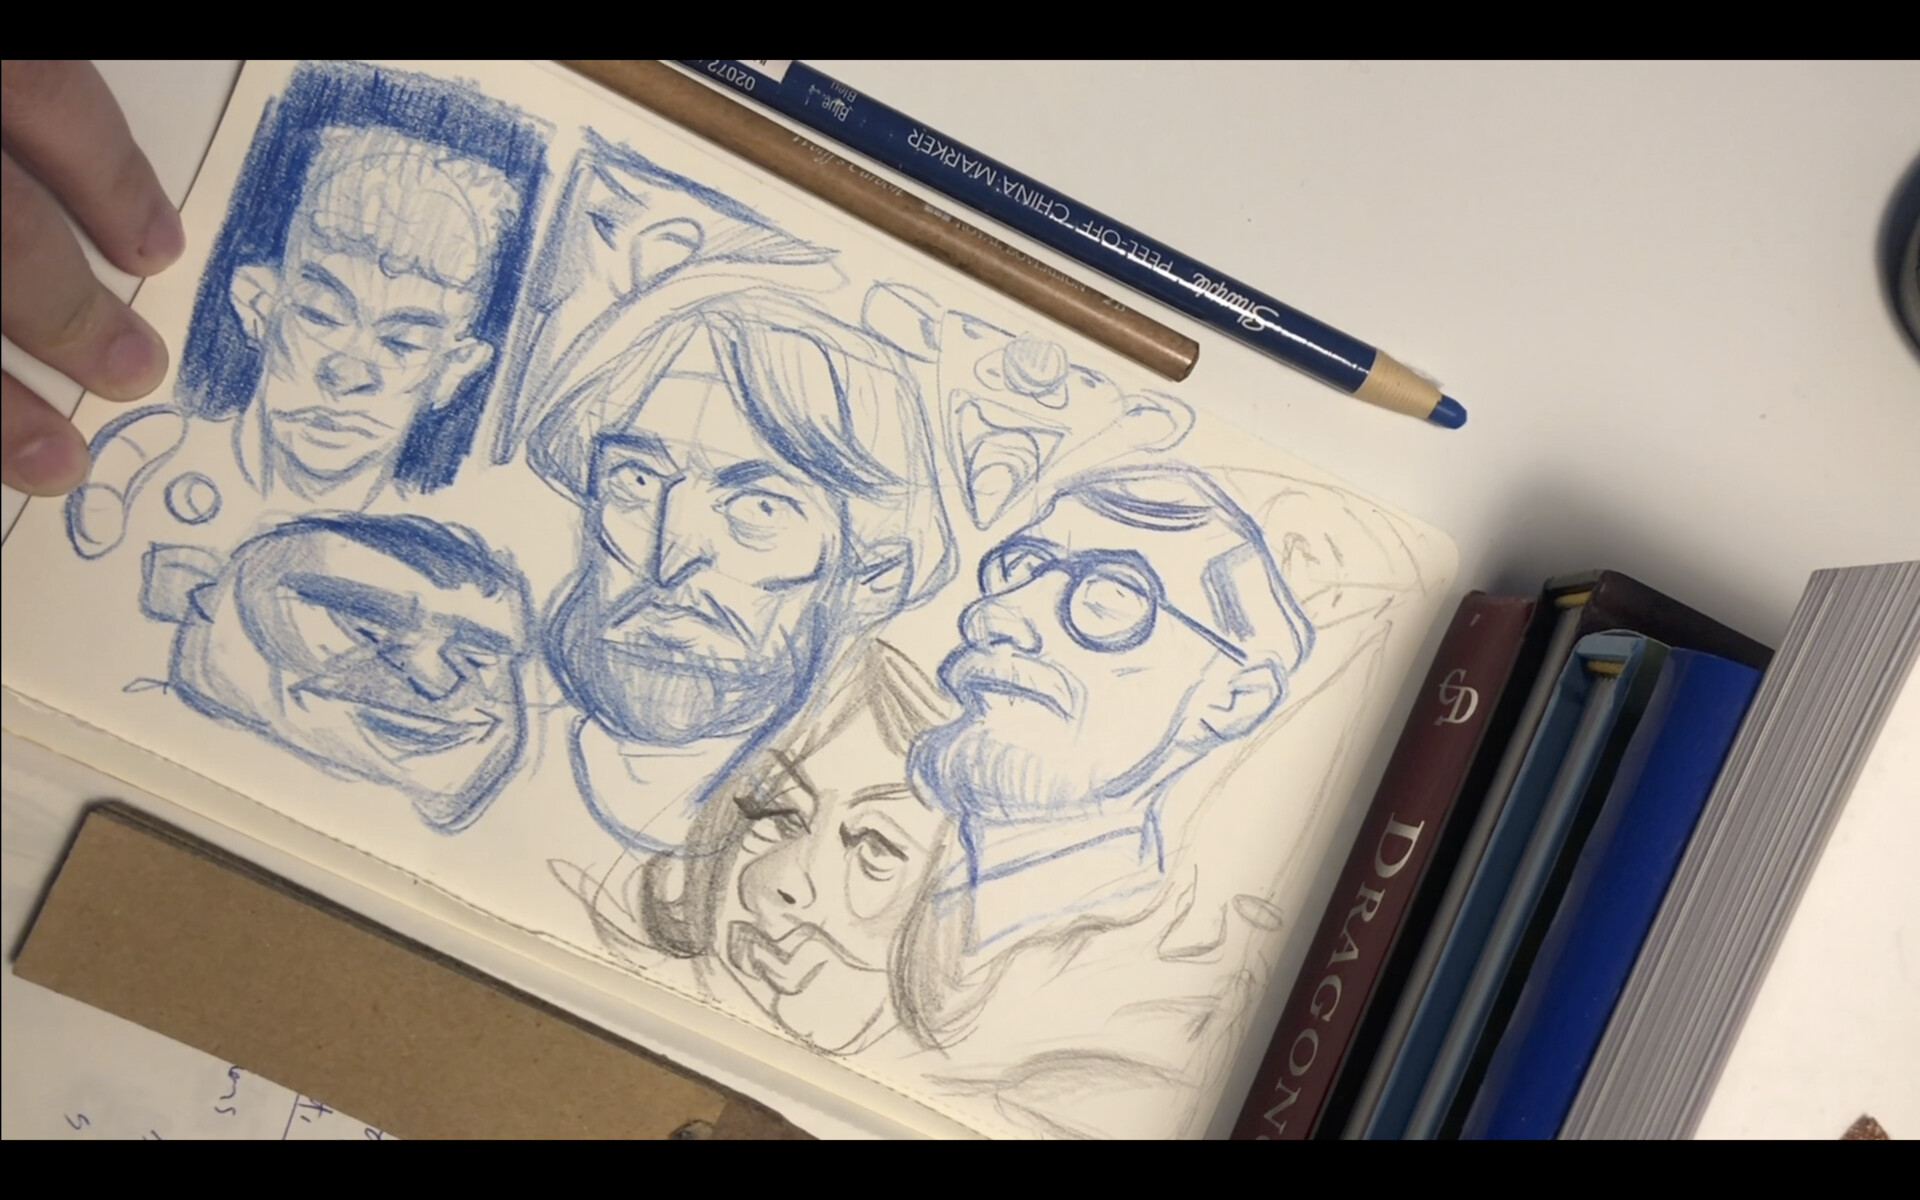 ArtStation - Sketchbook: Drawing with China Markers (Grease Pencil)